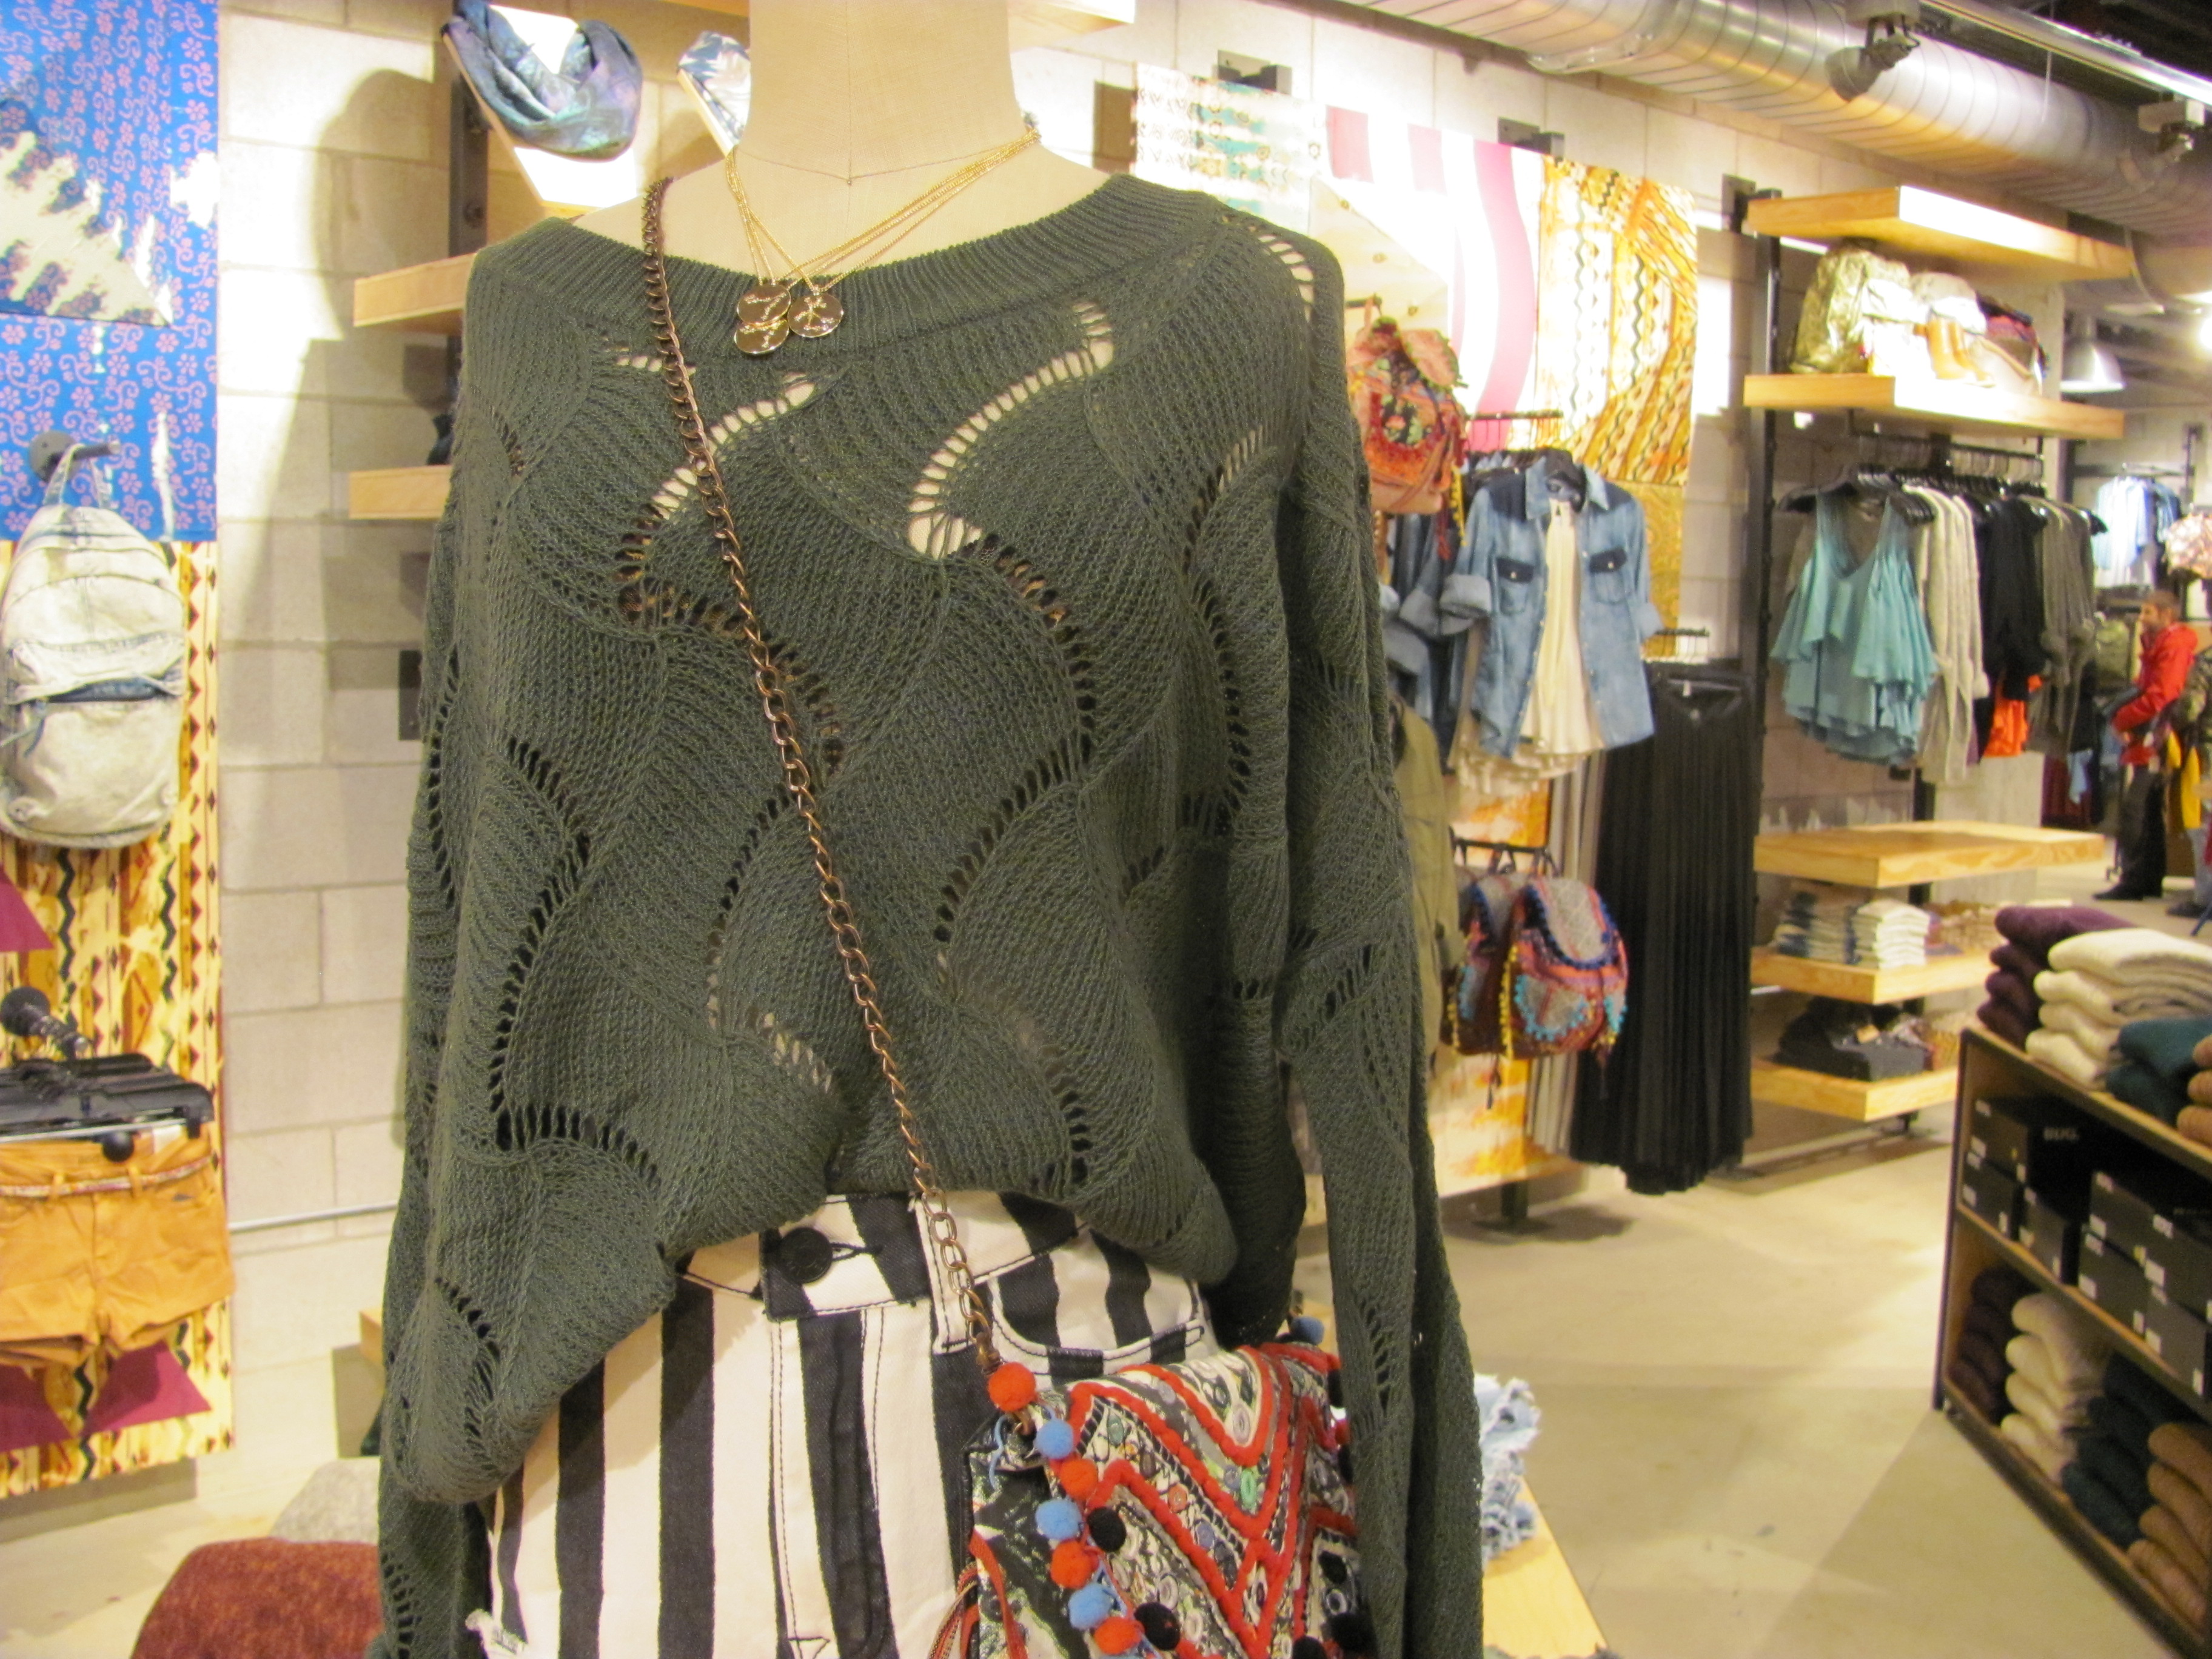 ve shopped at Urban Outfitters in Washington, Las Vegas, New York ...